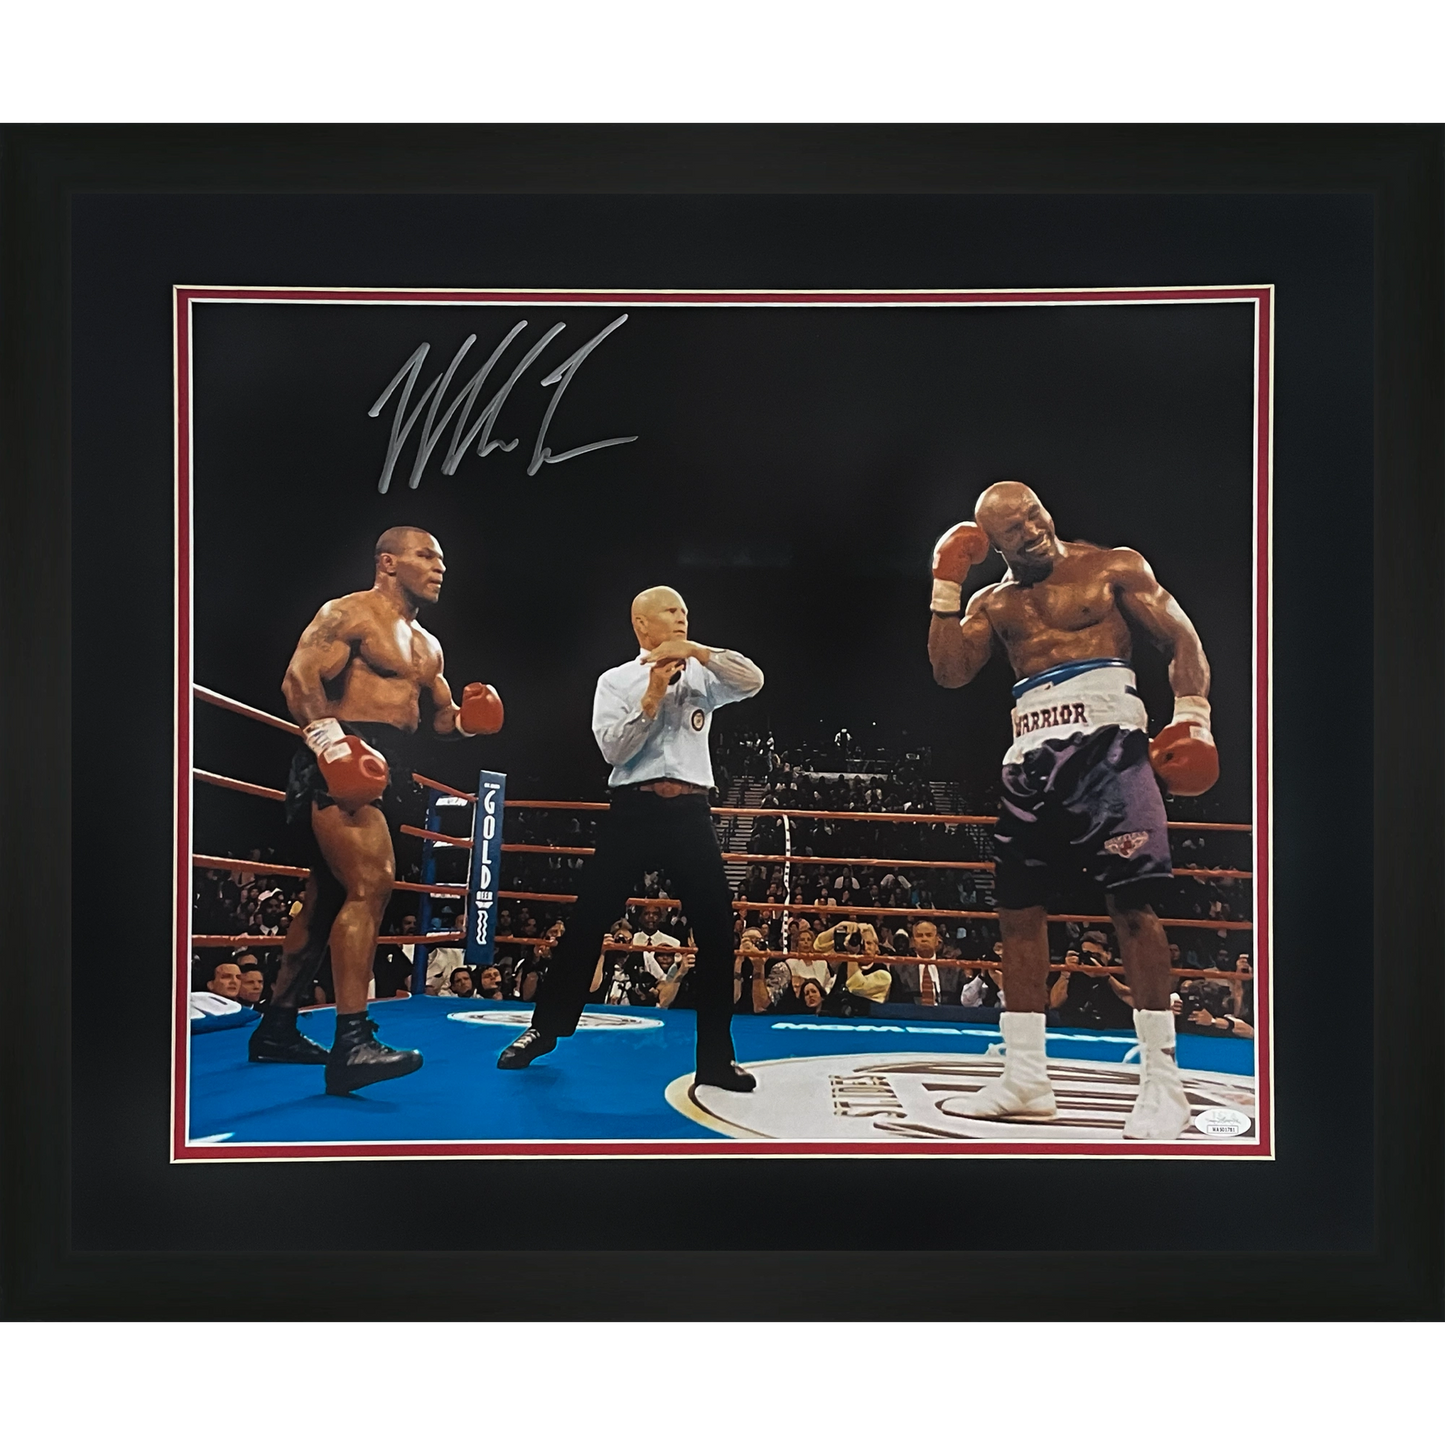 Mike Tyson Autographed Boxing (After Biting Evander Holyfield Ear) Deluxe Framed 16x20 Photo - JSA